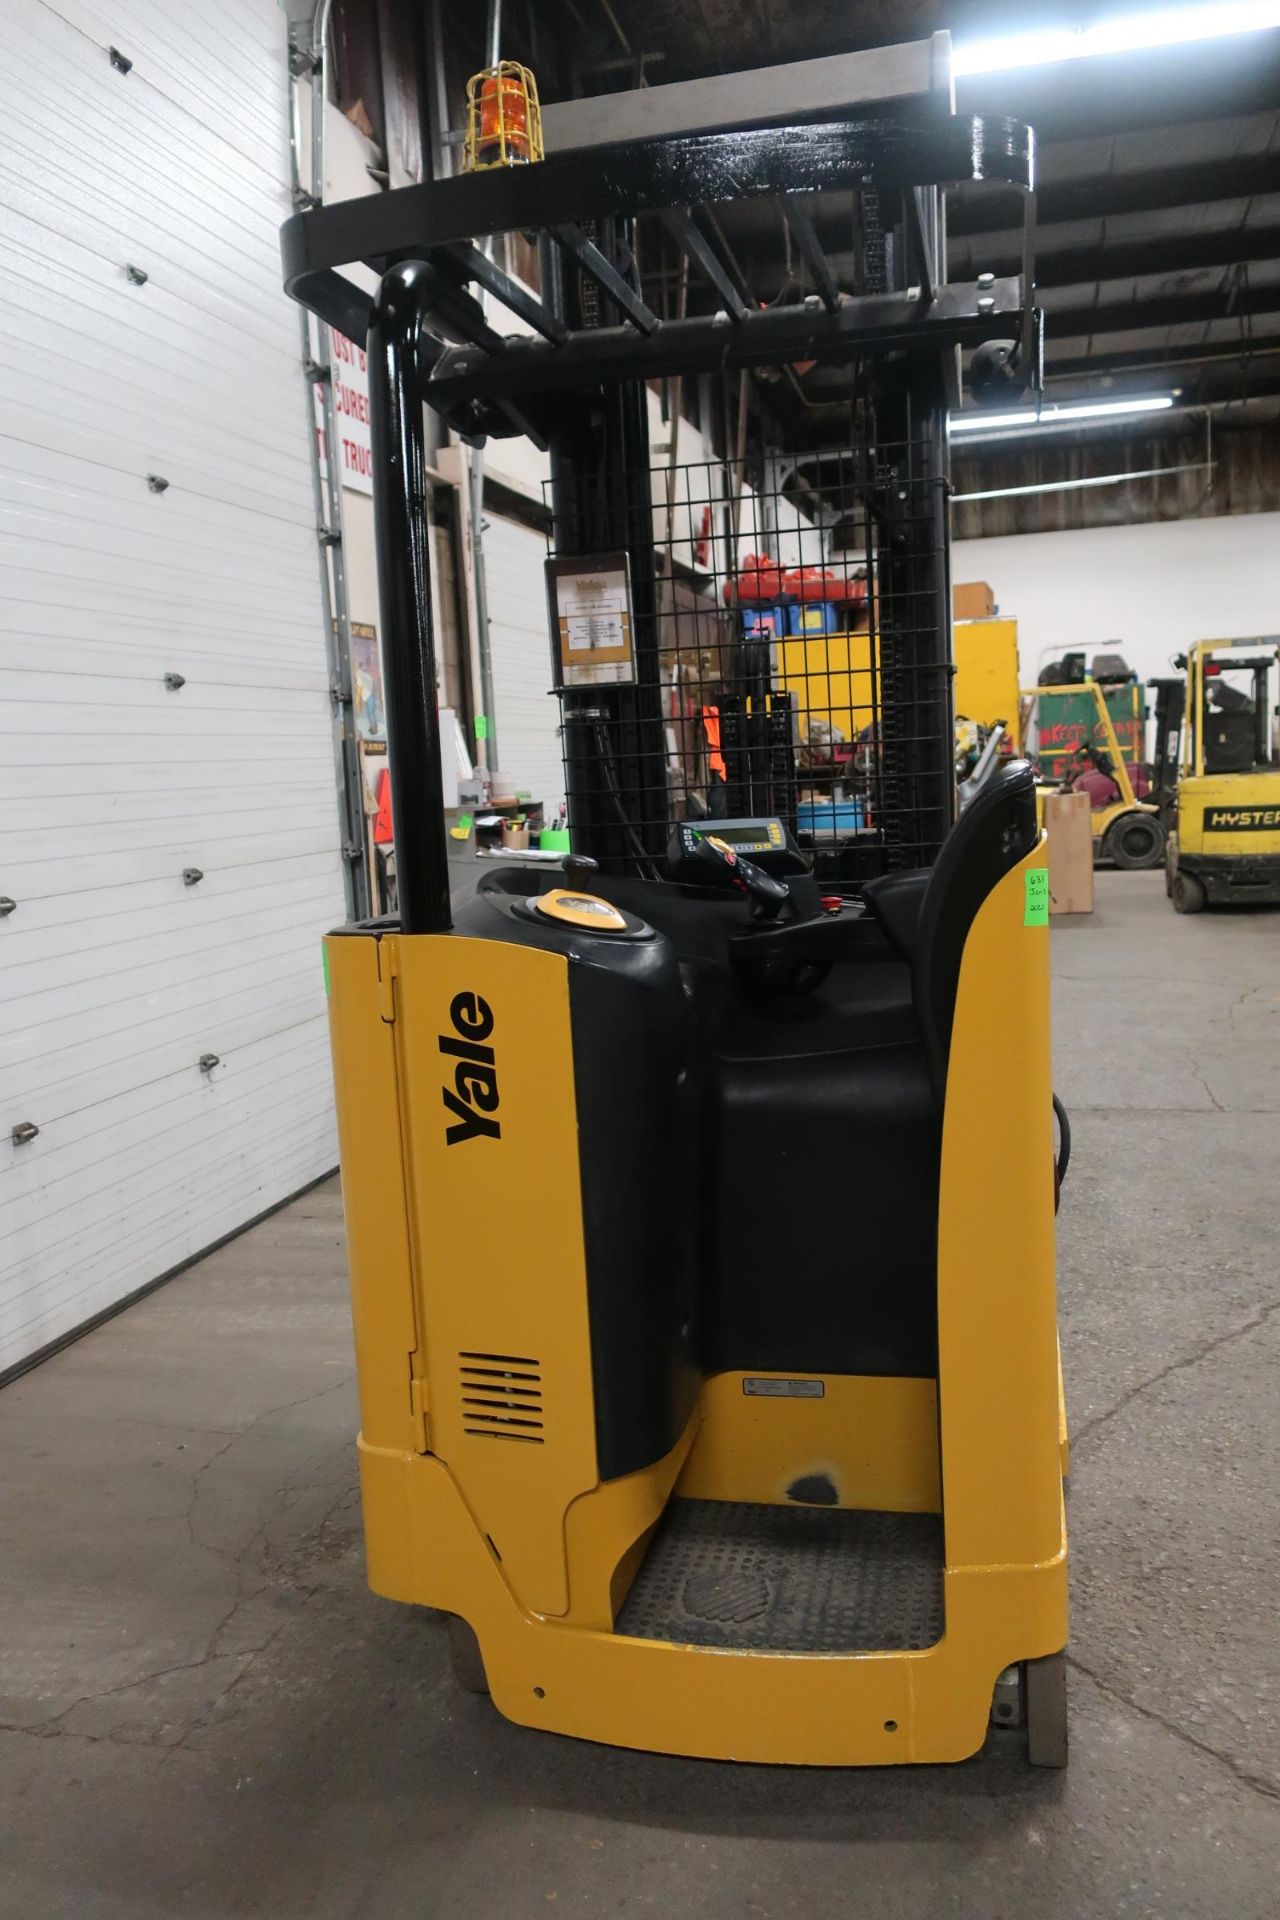 2011 Yale Reach Truck Pallet Lifter 3500lbs capacity unit ELECTRIC with sideshift - Image 3 of 3